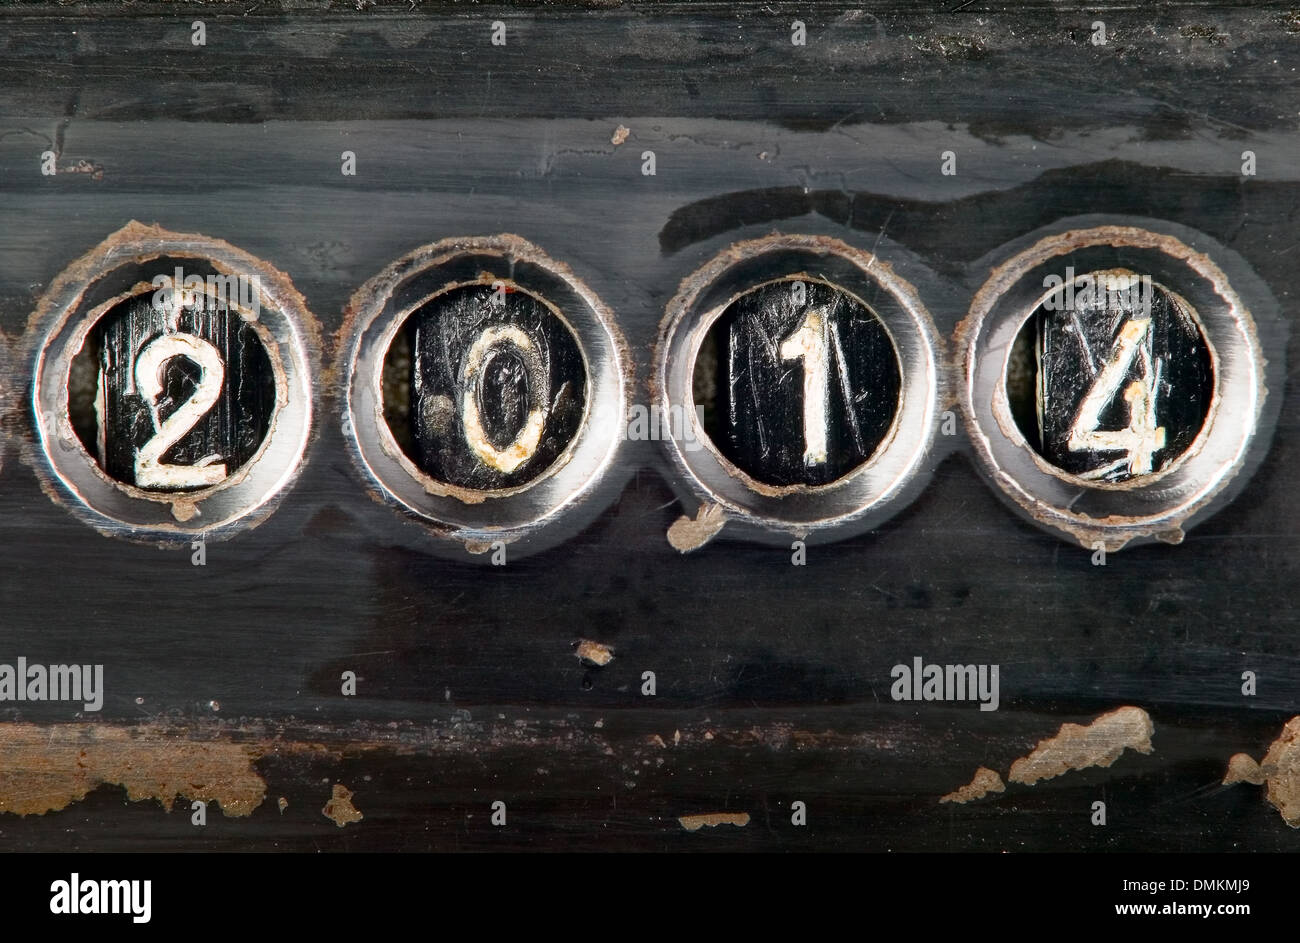 New year 2014 concept made from metal numbers Stock Photo